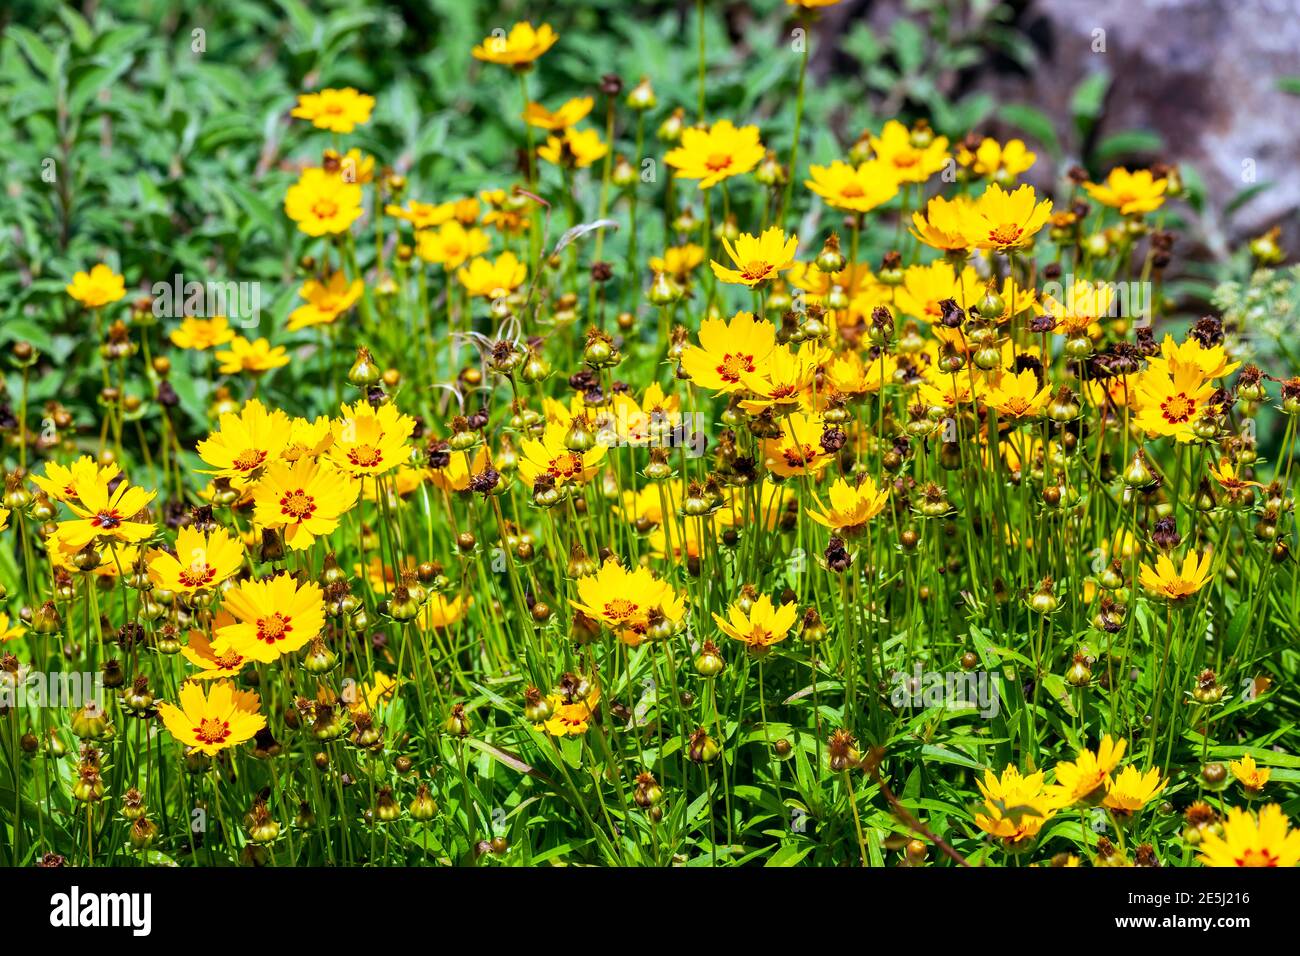 Coreopsis lanceolata 'Sterntaler' a summer flowering plant with yellow summertime flower from June until September and commonly known as tickseed, sto Stock Photo